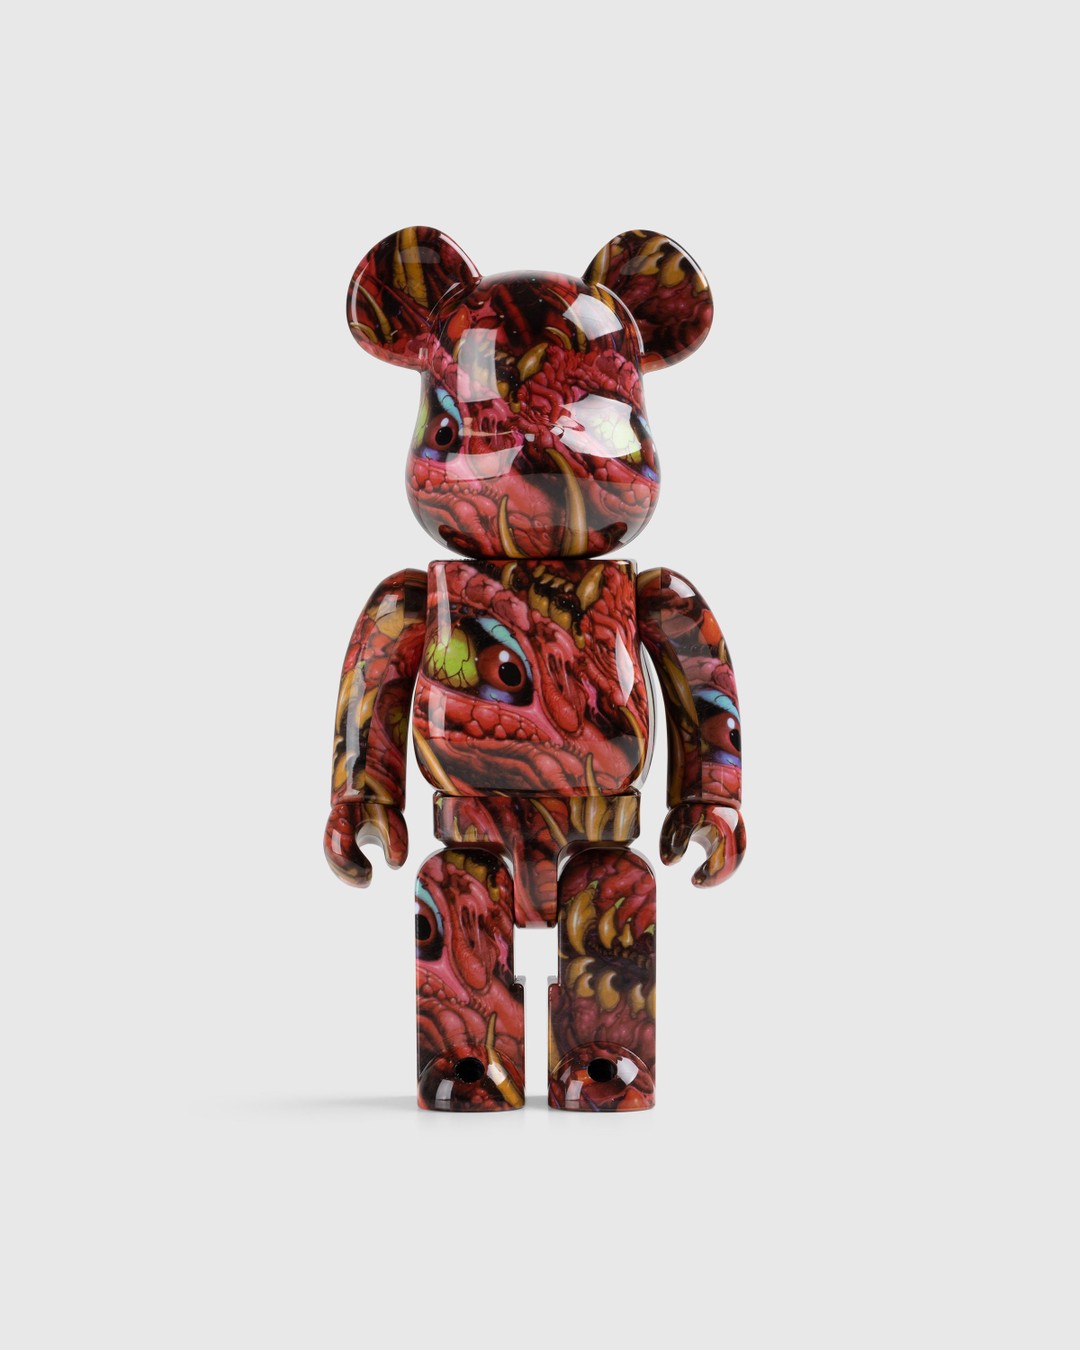 Medicom – Be@rbrick Lango 400% Red - Art & Collectibles - Red - Image 1